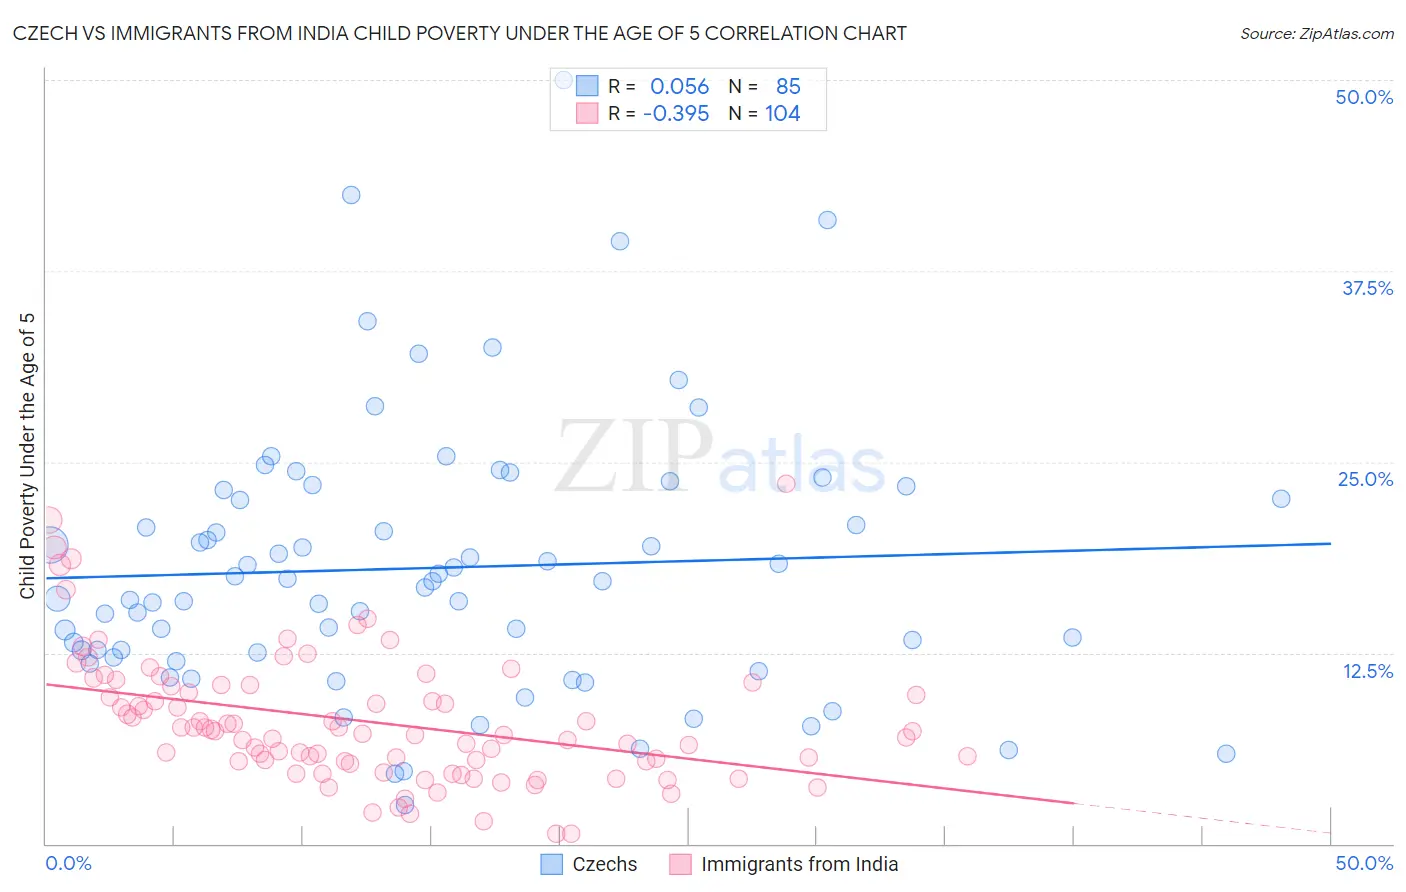 Czech vs Immigrants from India Child Poverty Under the Age of 5